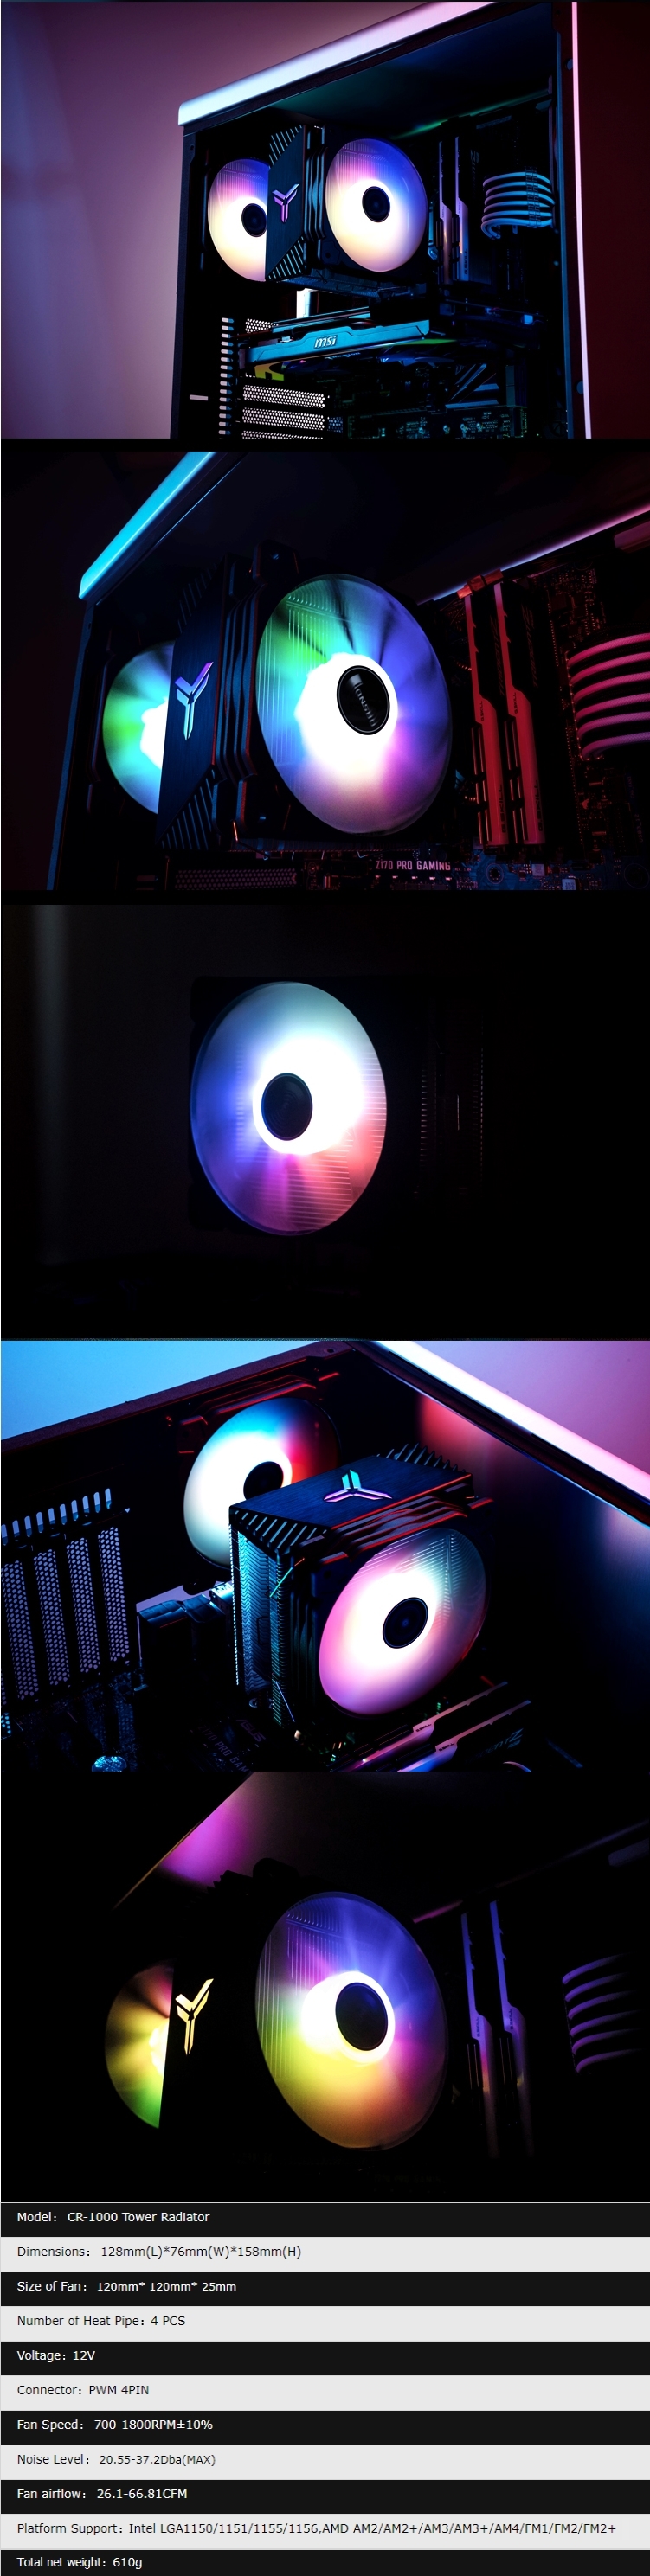 A large marketing image providing additional information about the product Jonsbo CR-1000 RGB LED CPU Cooler - Additional alt info not provided